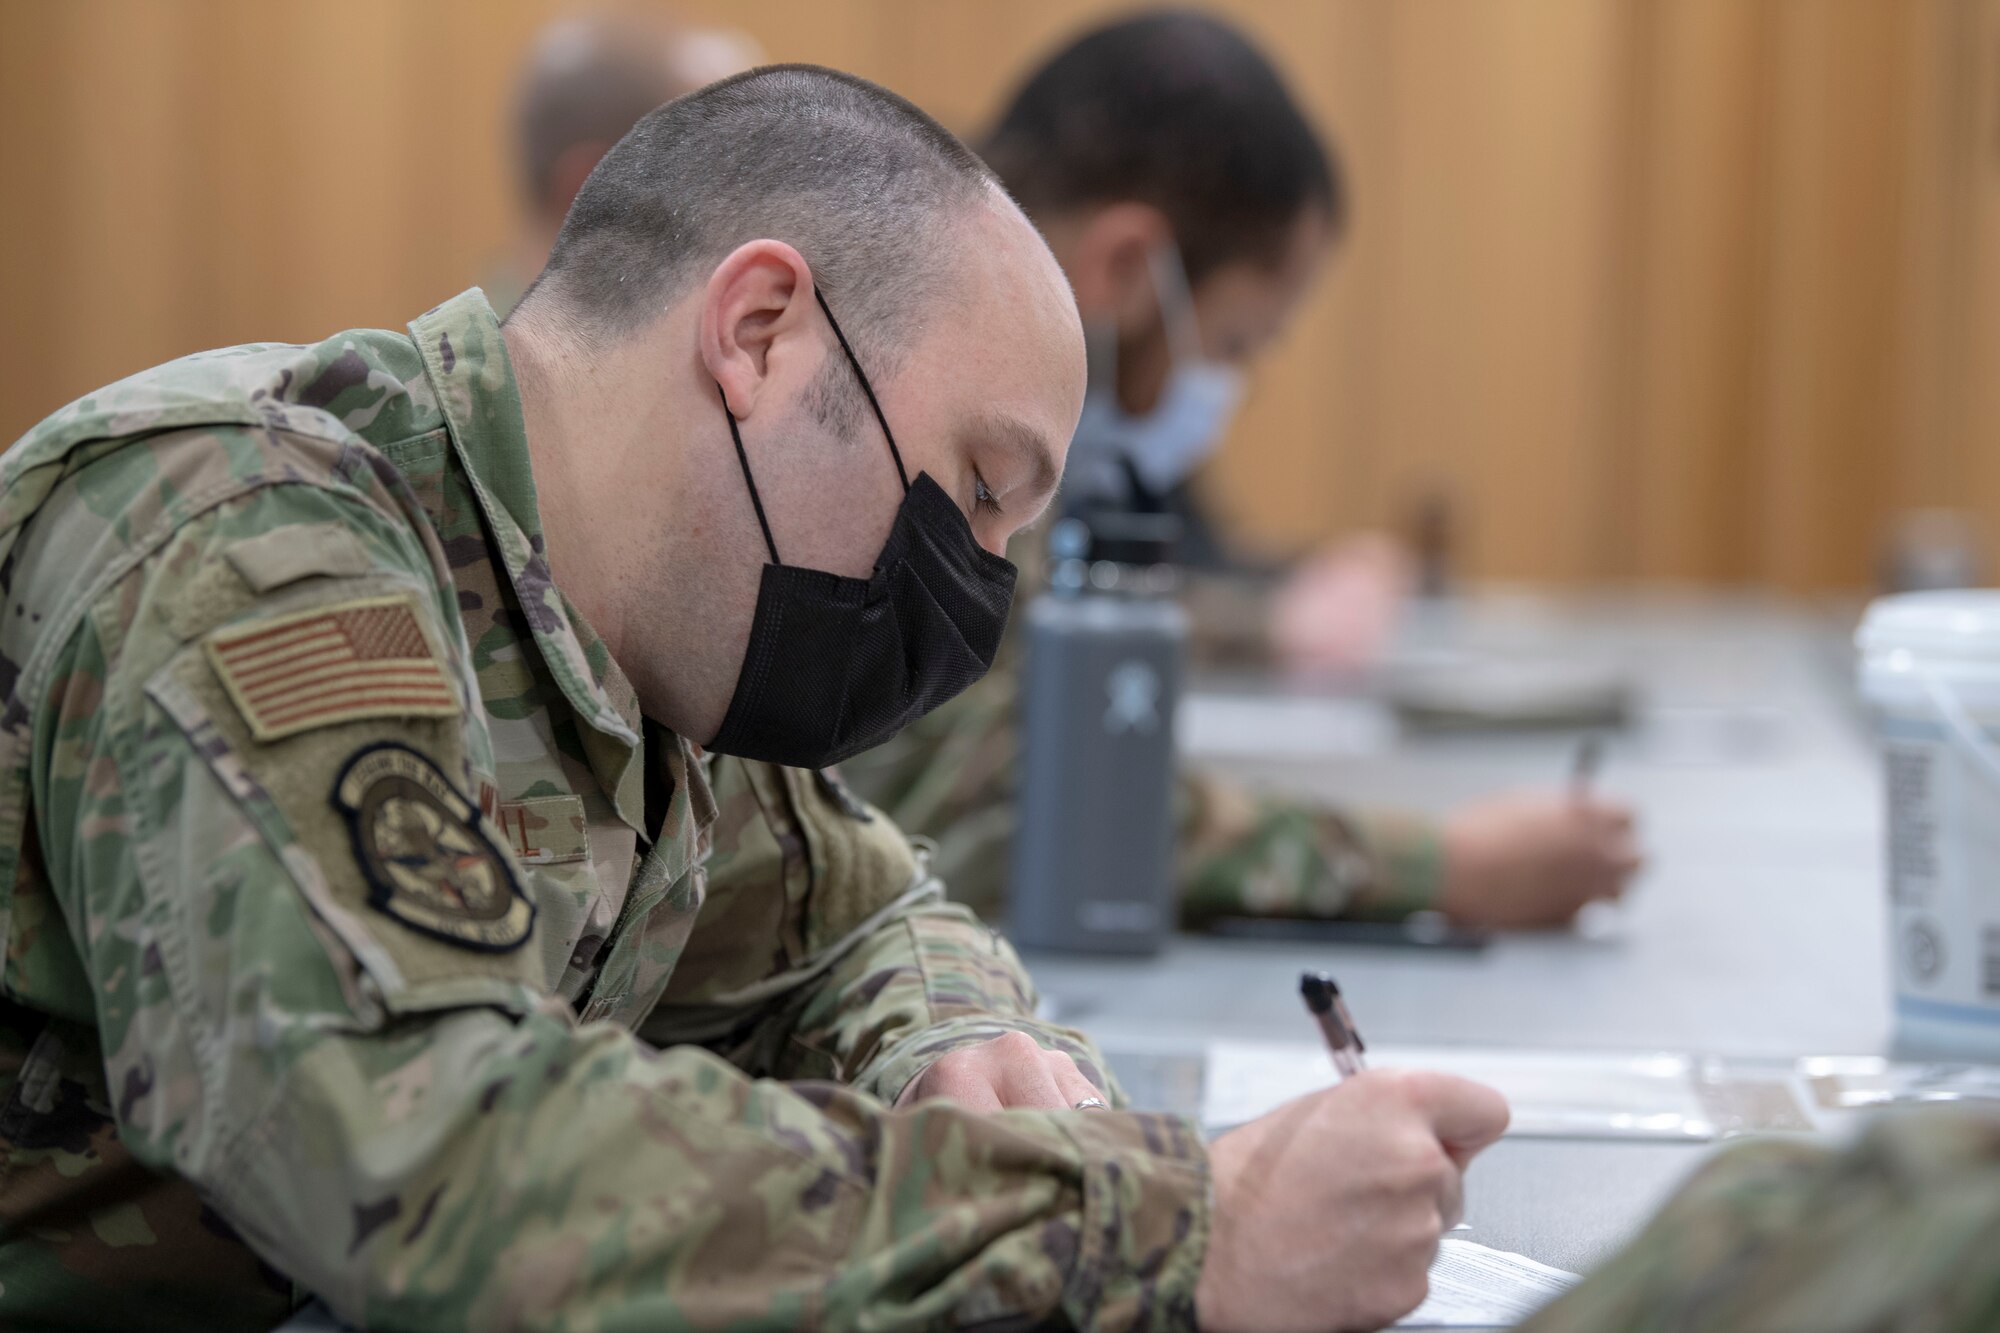 Airmen assigned to the 701st Munitions Maintenance Squadron complete paperwork before being administered the COVID-19 vaccine at Kleine Brogel Air Base, Belgium, March 19, 2021. These vaccines were administered by independent duty medical technicians who are responsible for providing all the medical care for members assigned to the 701st MUNSS. (U.S. Air Force photo by Senior Airman Alex Miller)